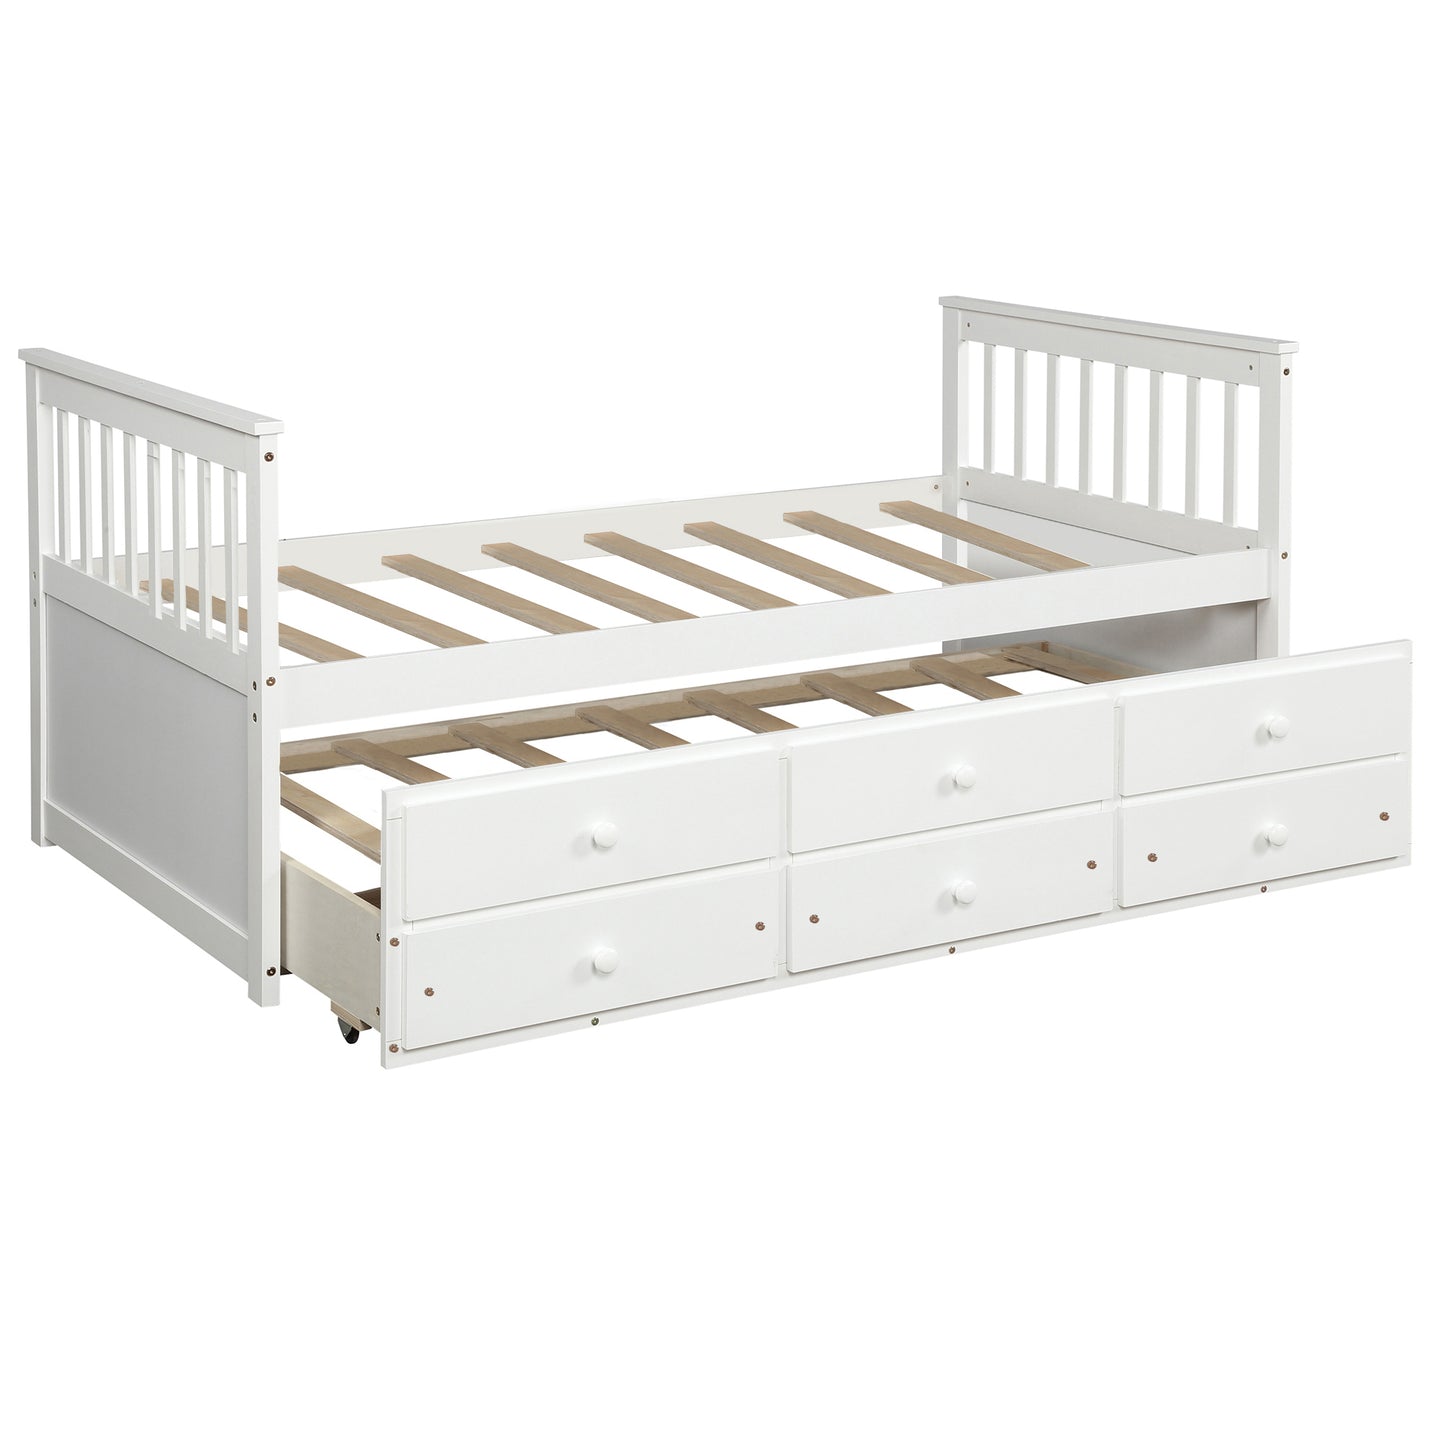 TOPMAX Captain's Bed Twin Daybed with Trundle Bed and Storage Drawers, White